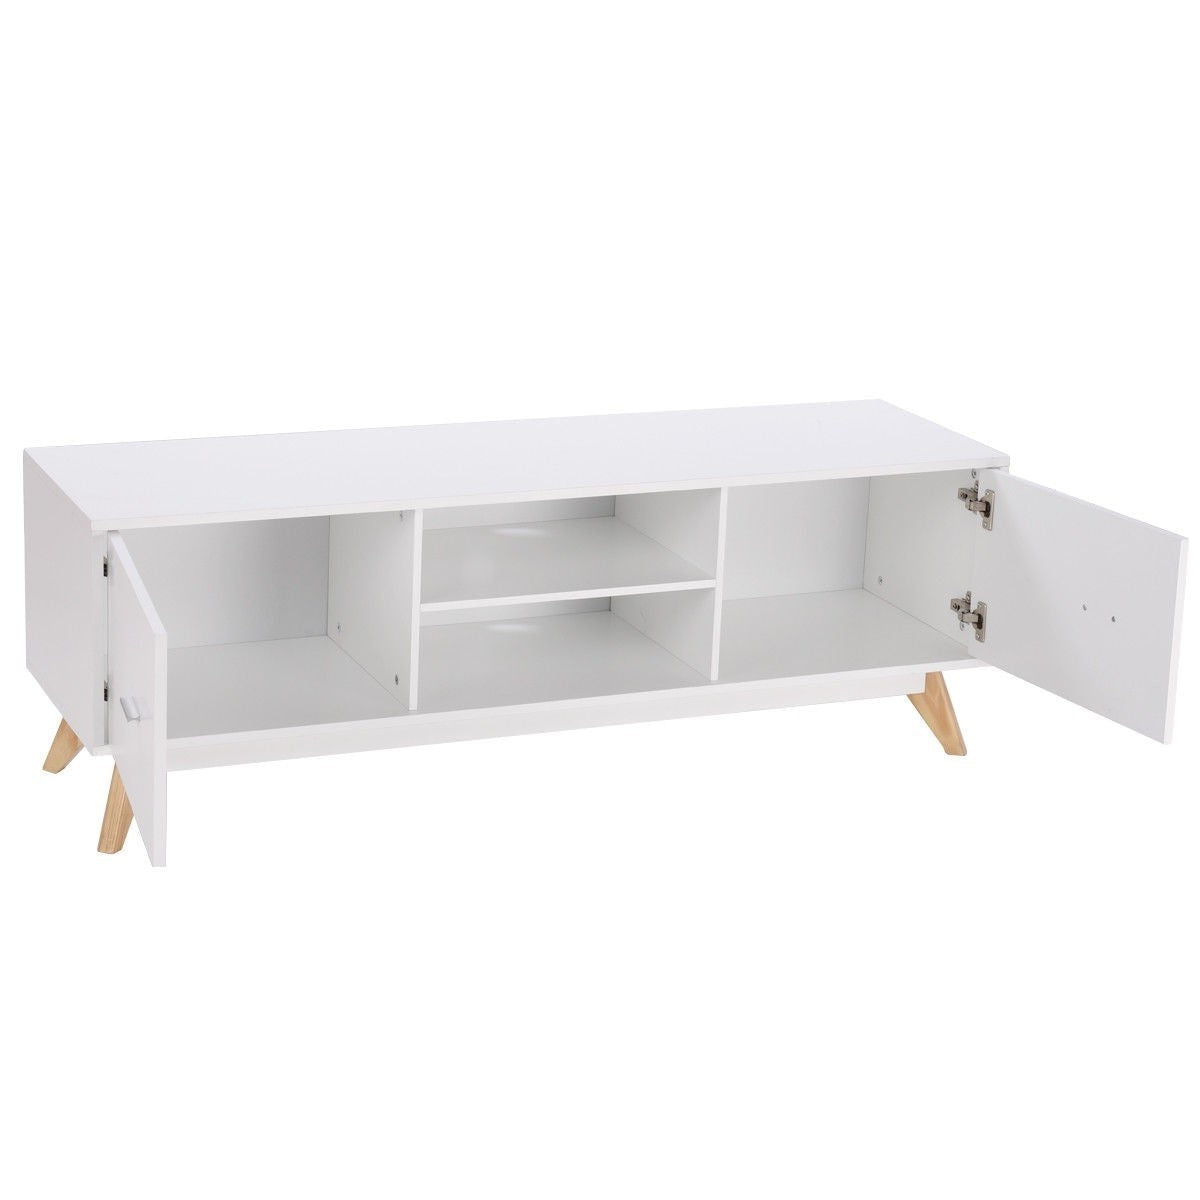 Living Room > TV Stands And Entertainment Centers - Modern Mid Century Style White TV Stand With Wood Legs